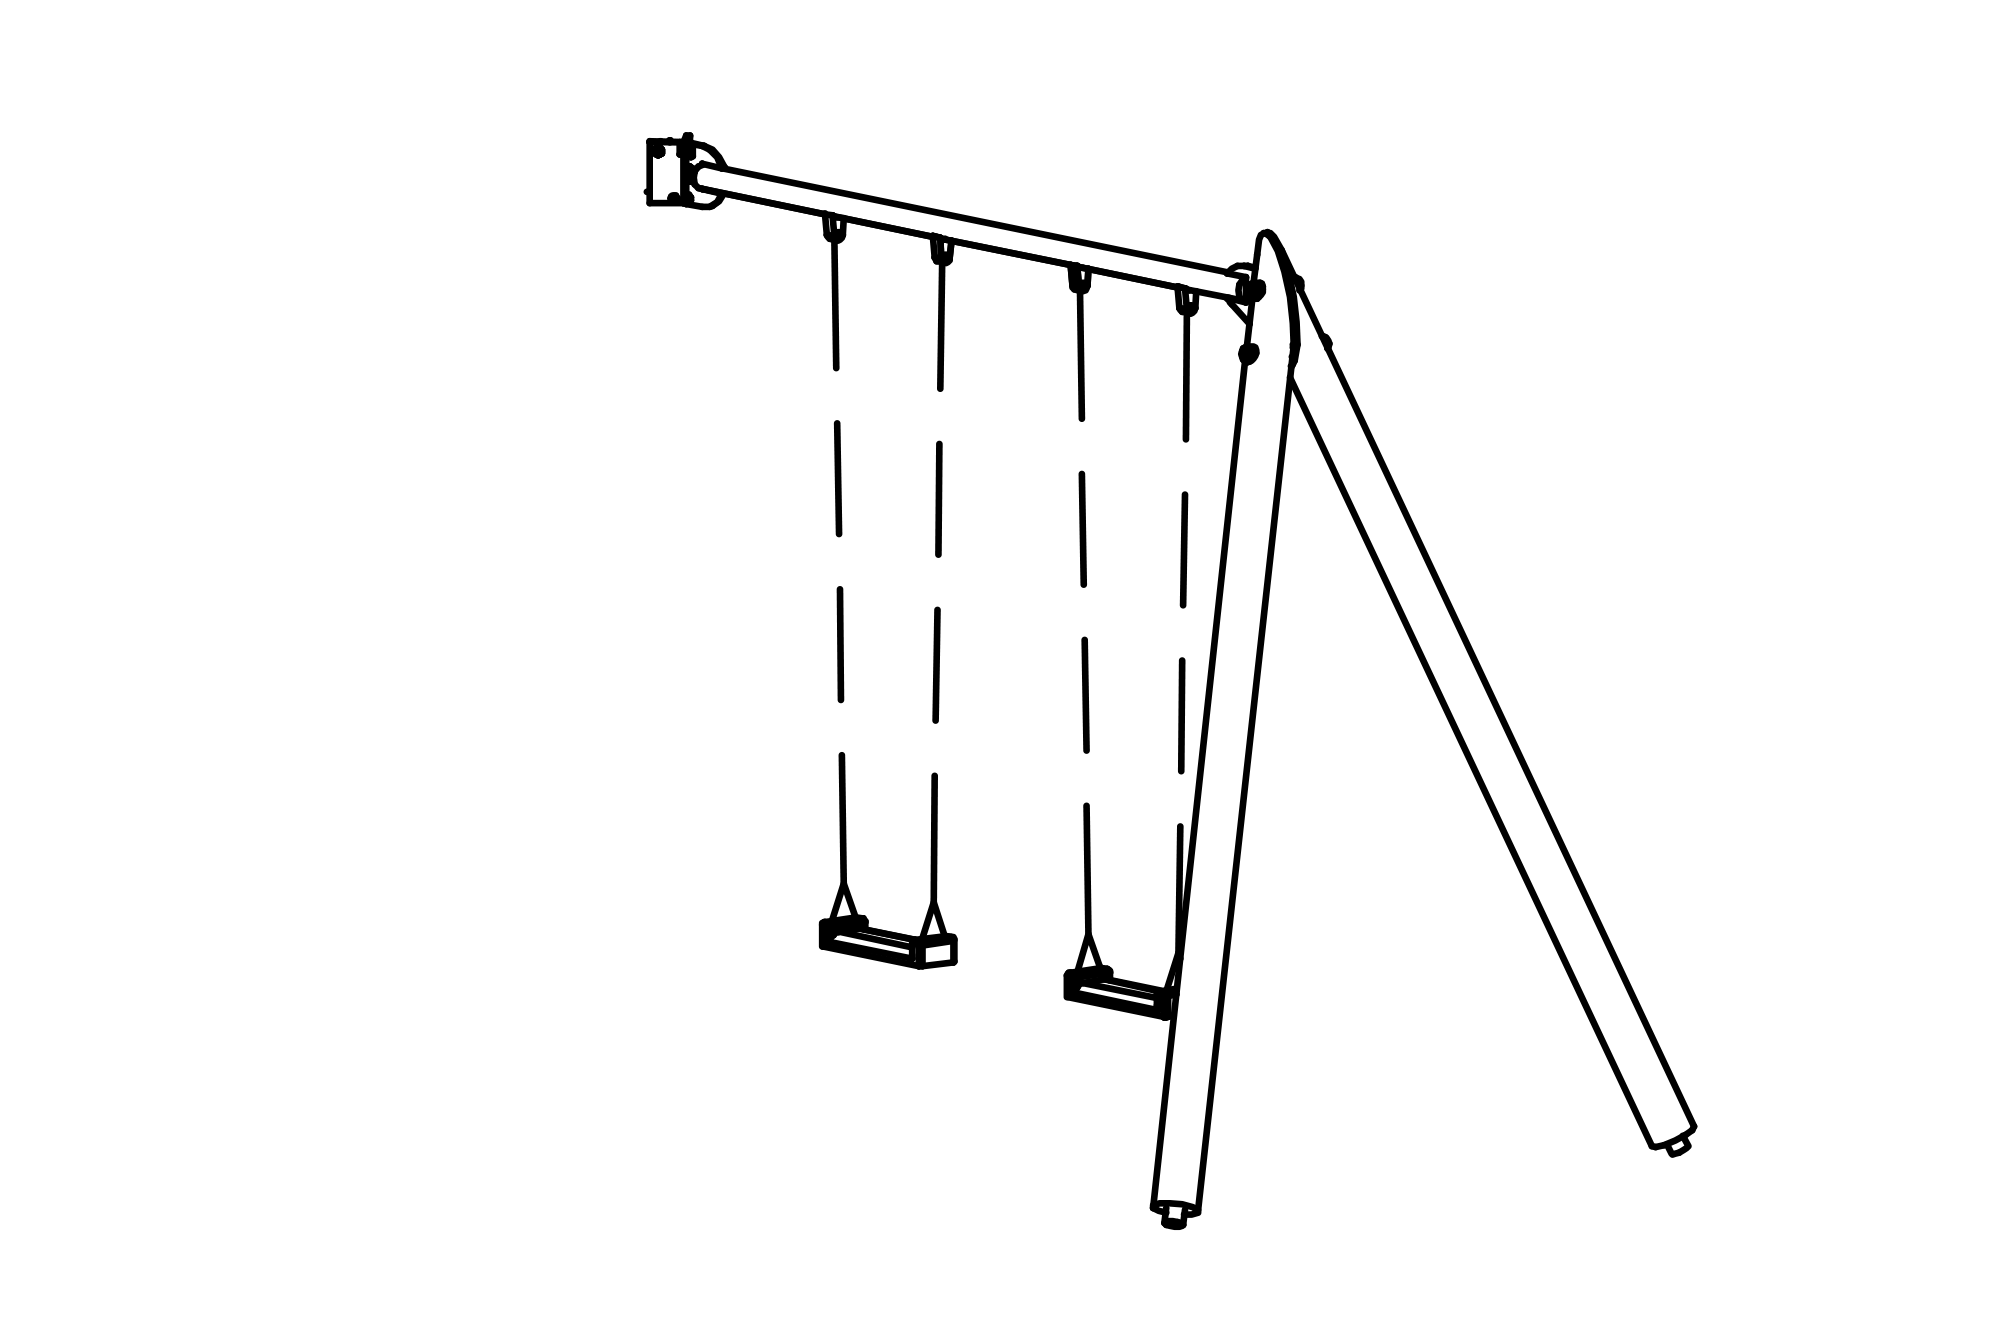 Double Swing special, height = 3 m